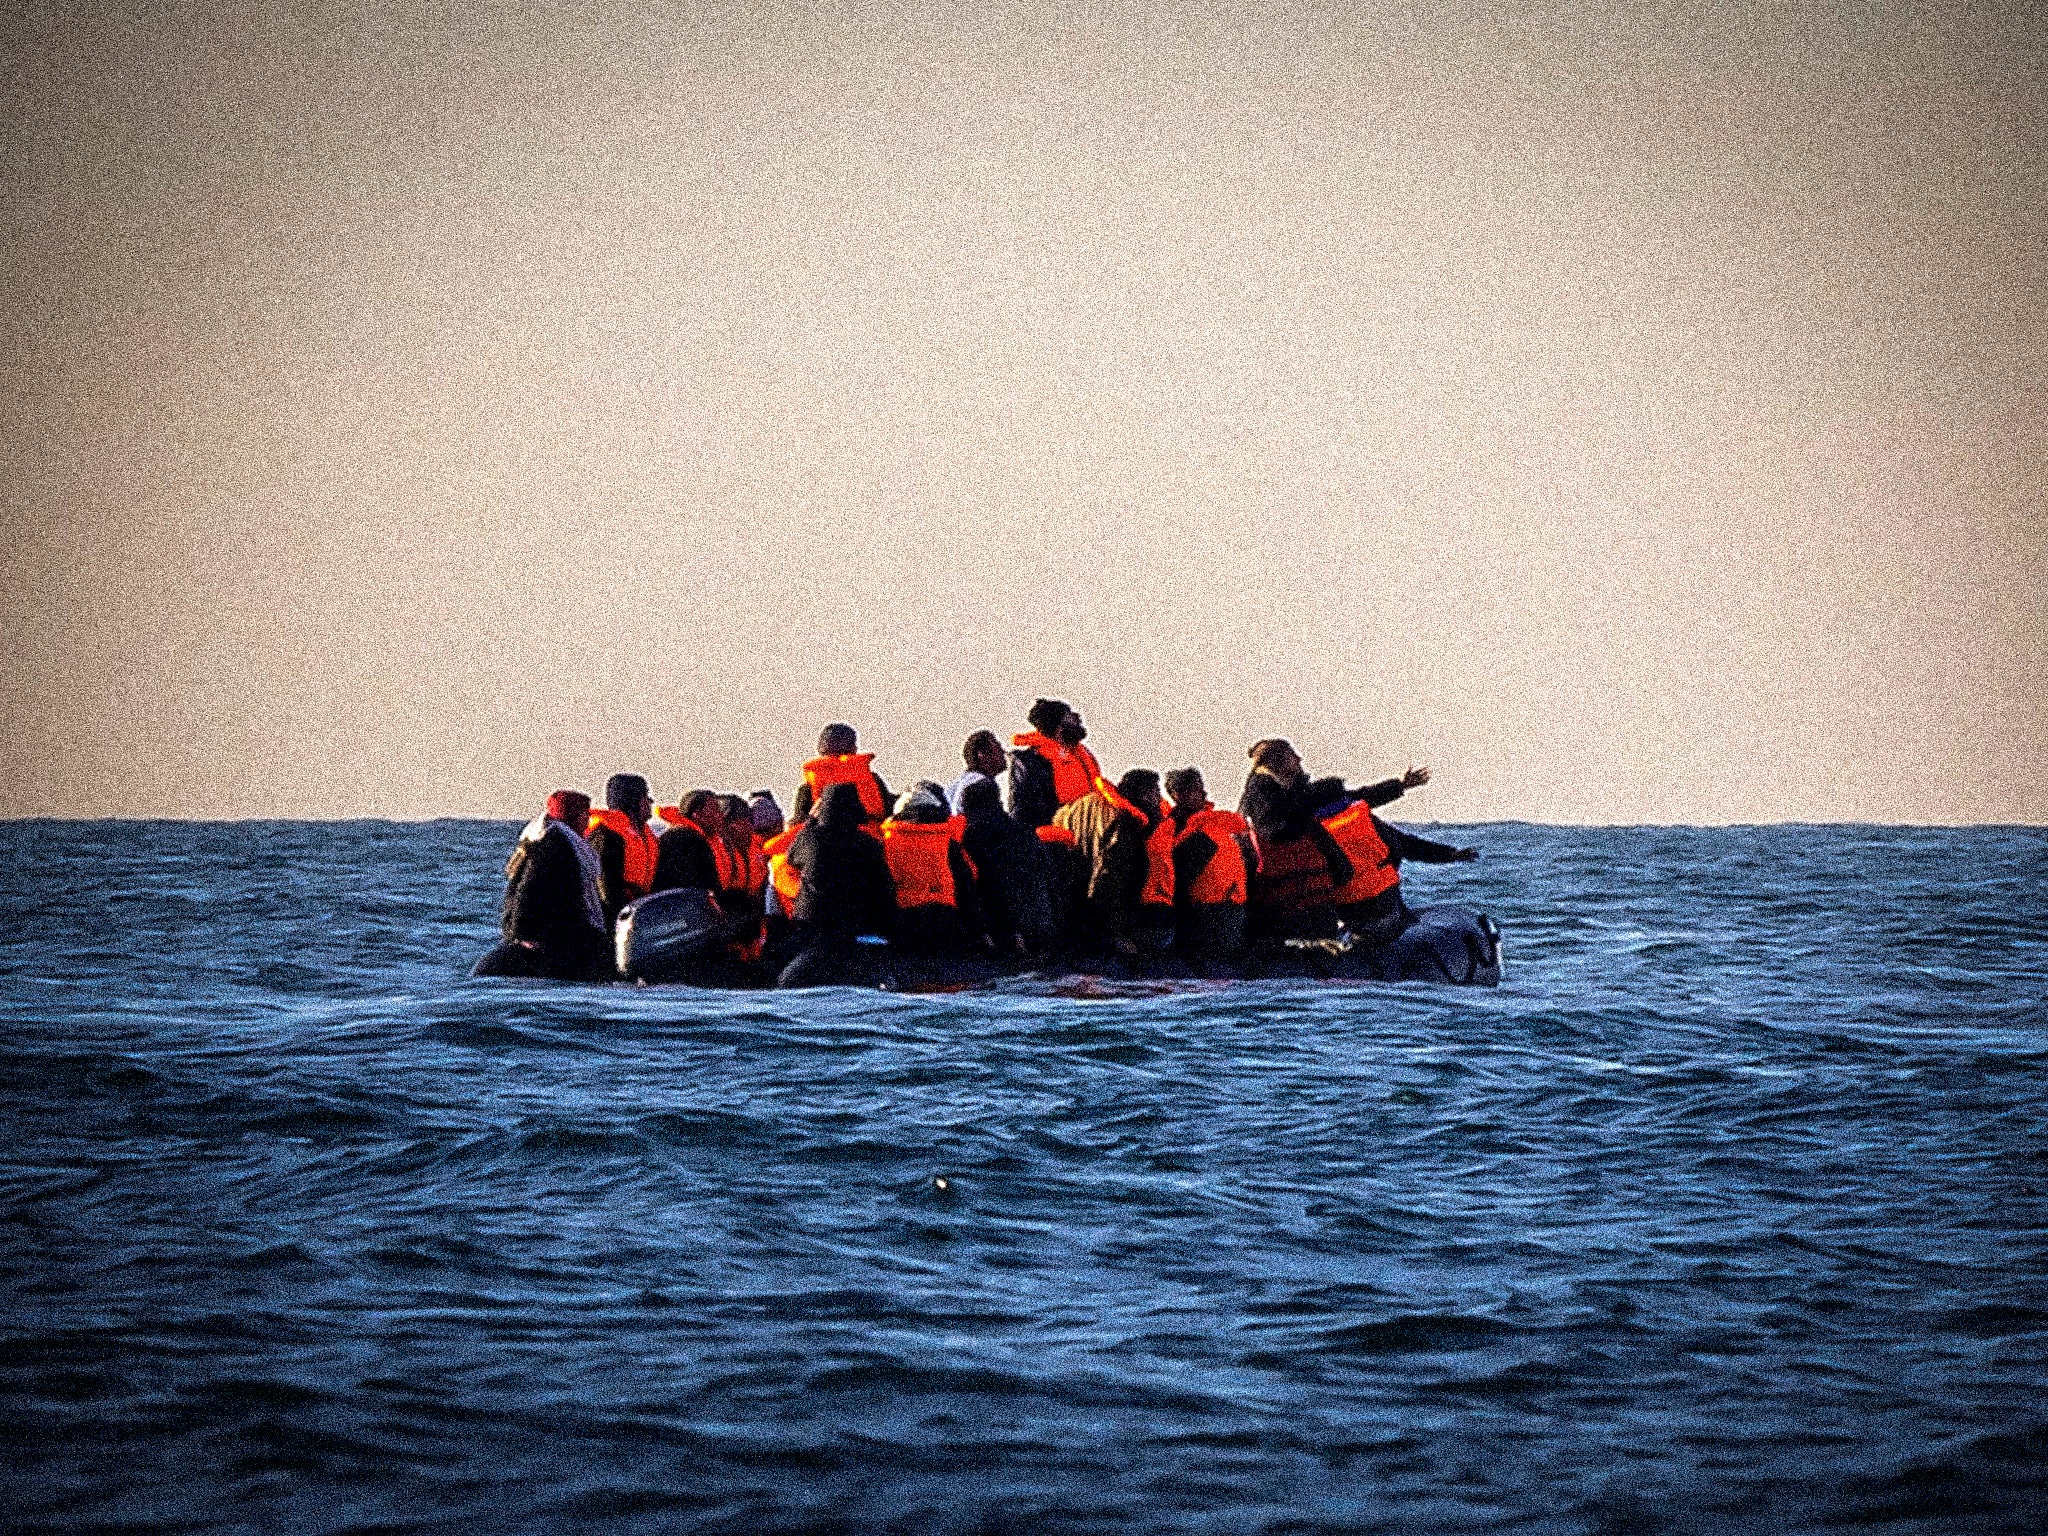 More than 25,000 people have been detected crossing the Channel in small boats so far in 2023